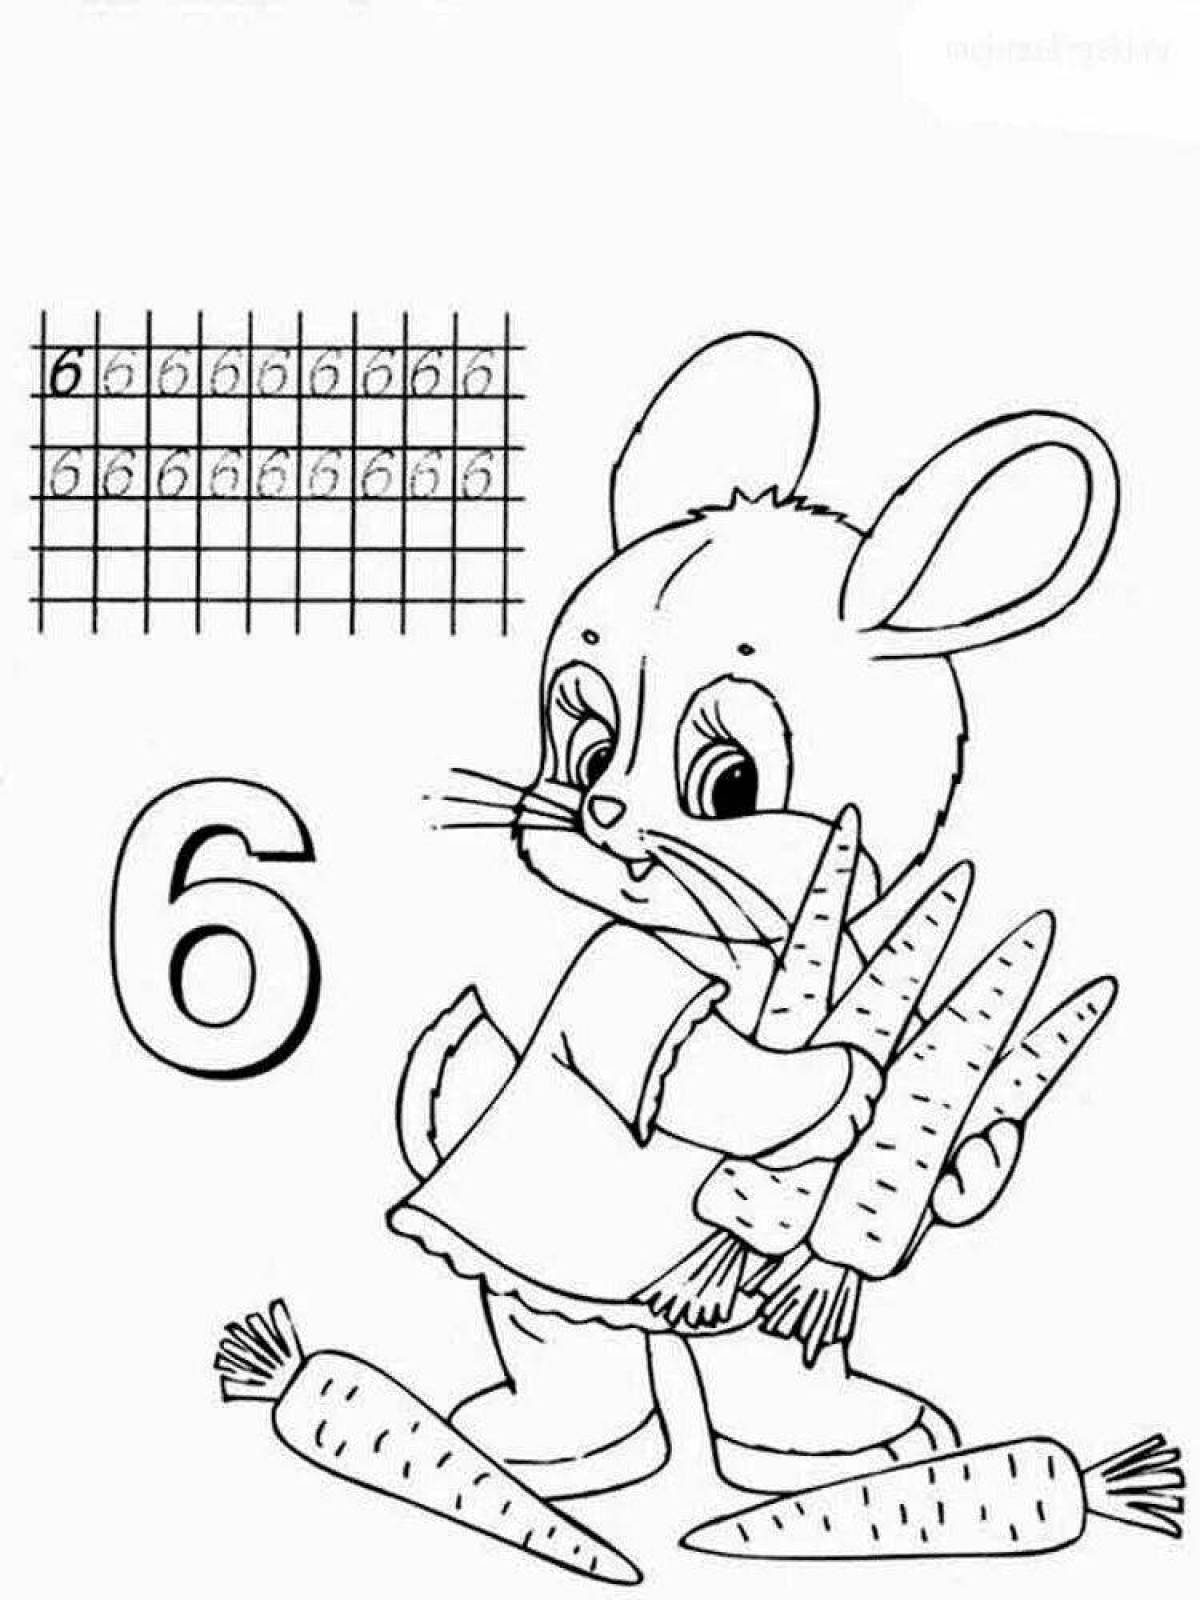 Color-frenzy coloring page number 6 for kids